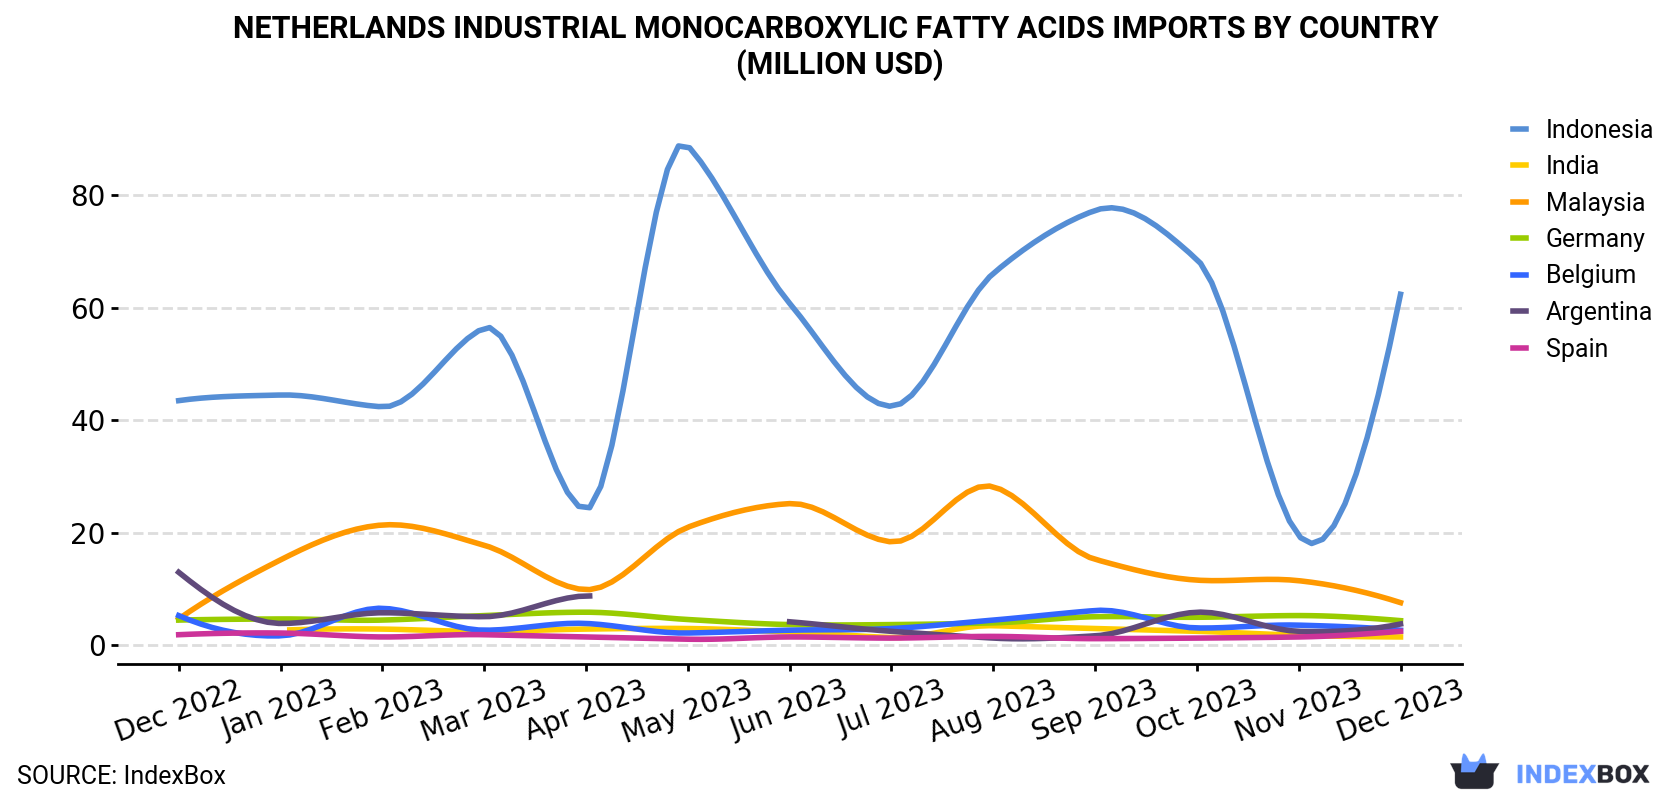 Netherlands Industrial Monocarboxylic Fatty Acids Imports By Country (Million USD)